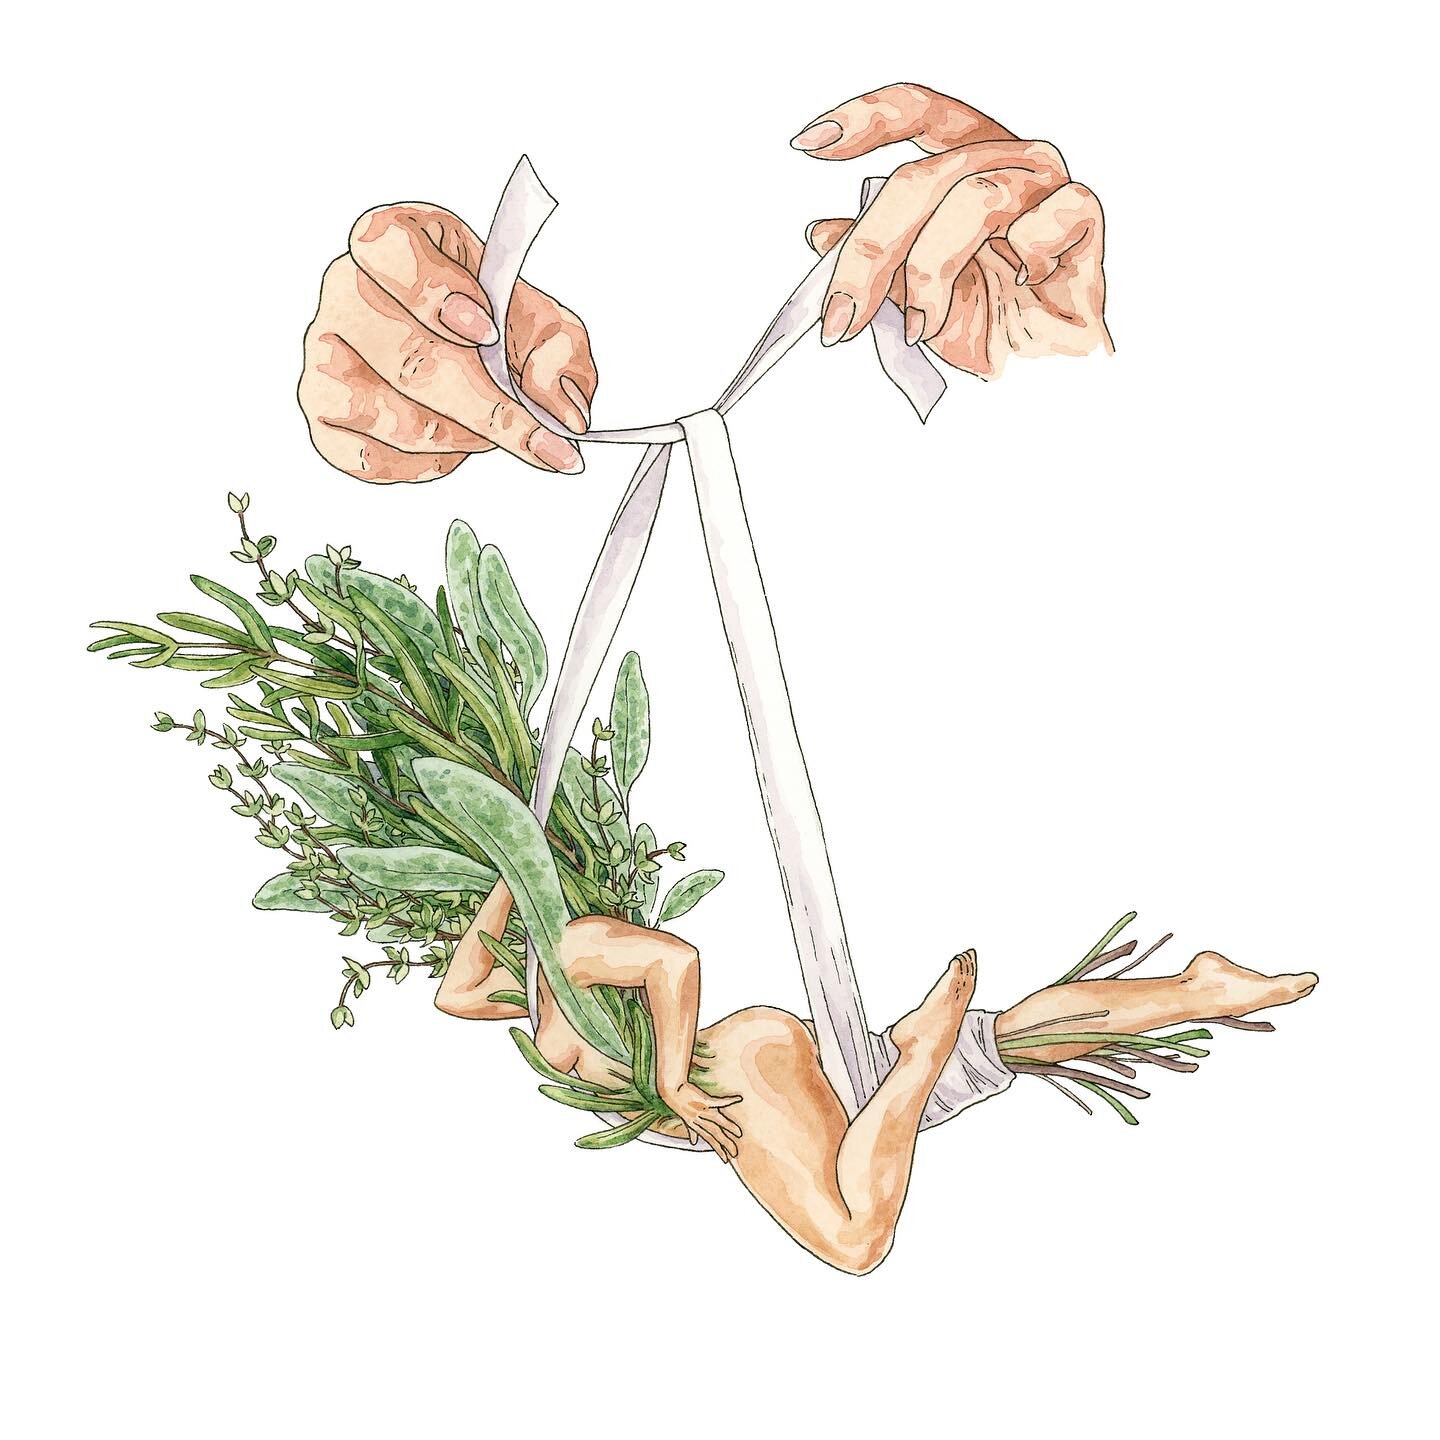 Turkey Herbs 🌿 all bundled and ready for cooking ~ available as a sticker and special shimmer embellished print on my Patreon ~ this month only! 🤍

Loved working on this piece, it was a reflection of what I&rsquo;m thankful for this year which has 